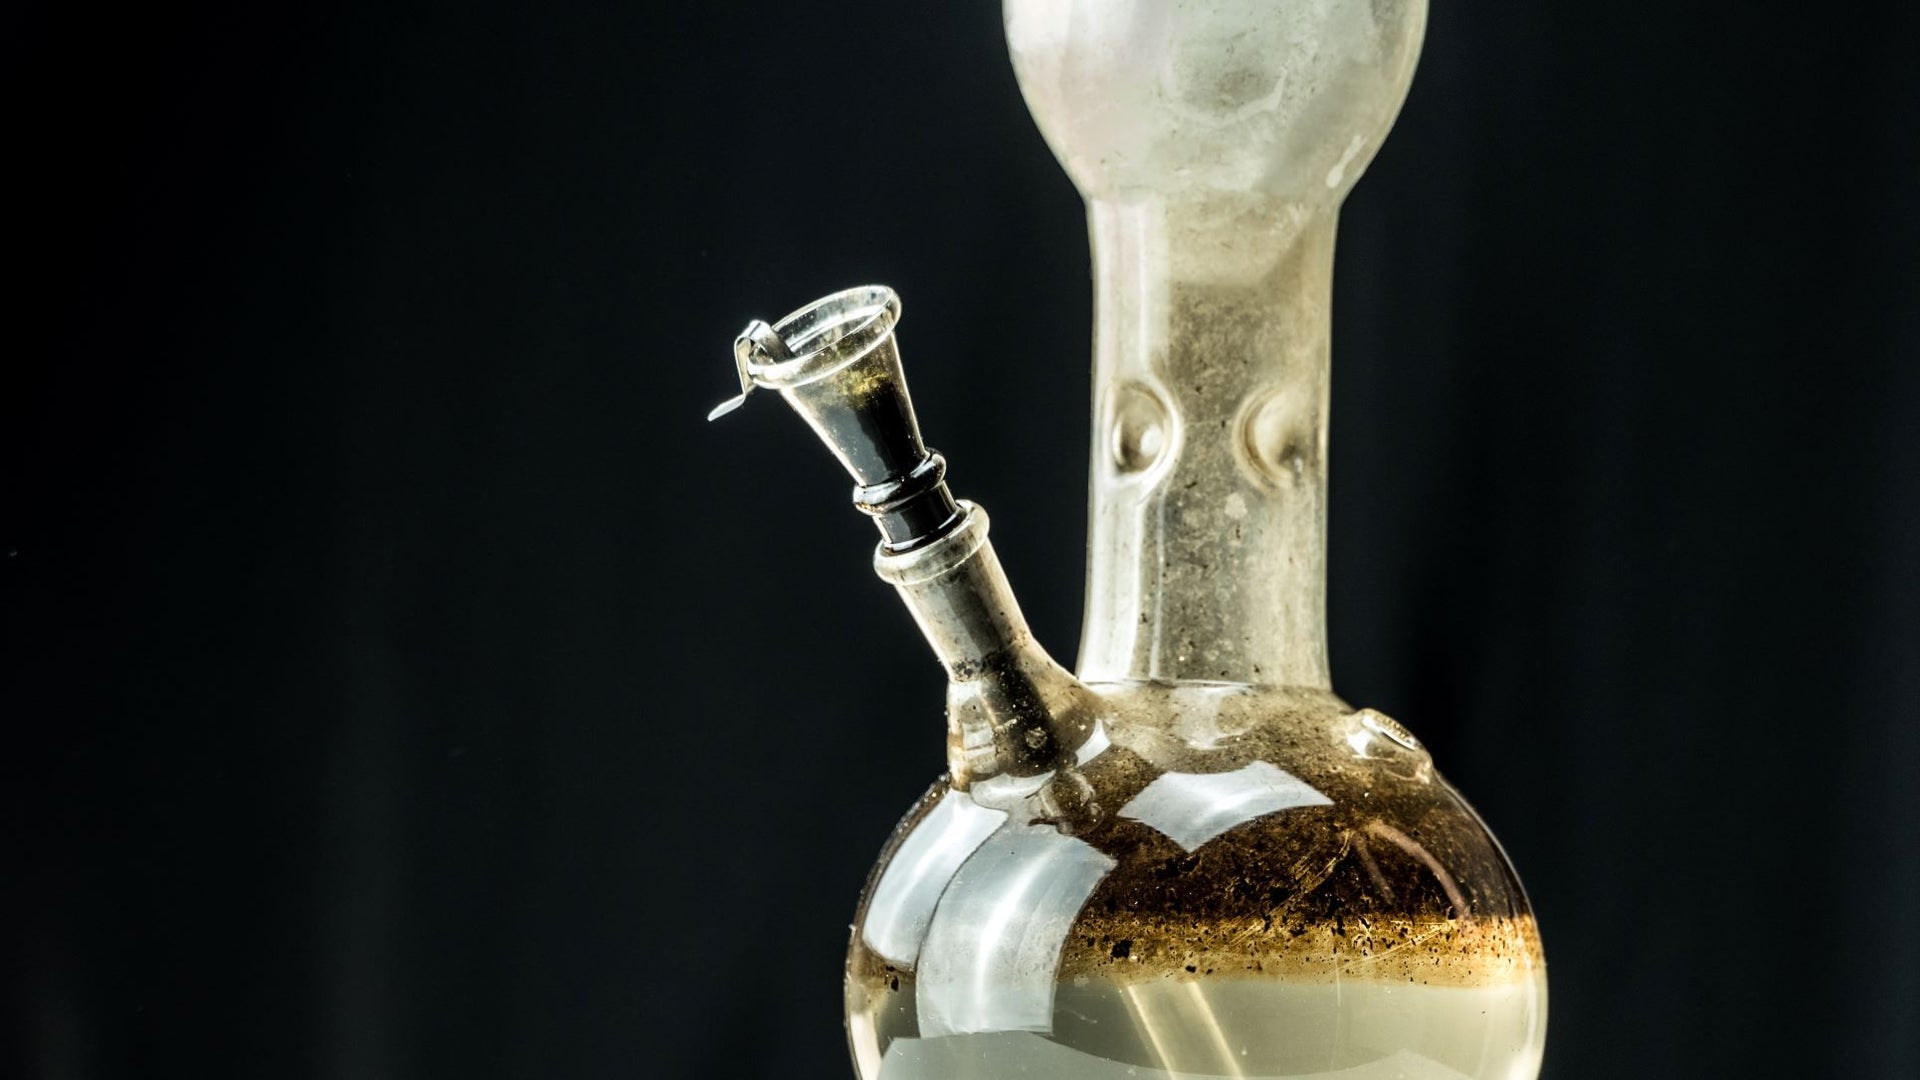 Bong Cleaning Service - Glass Bong and Pipe Cleaning Services